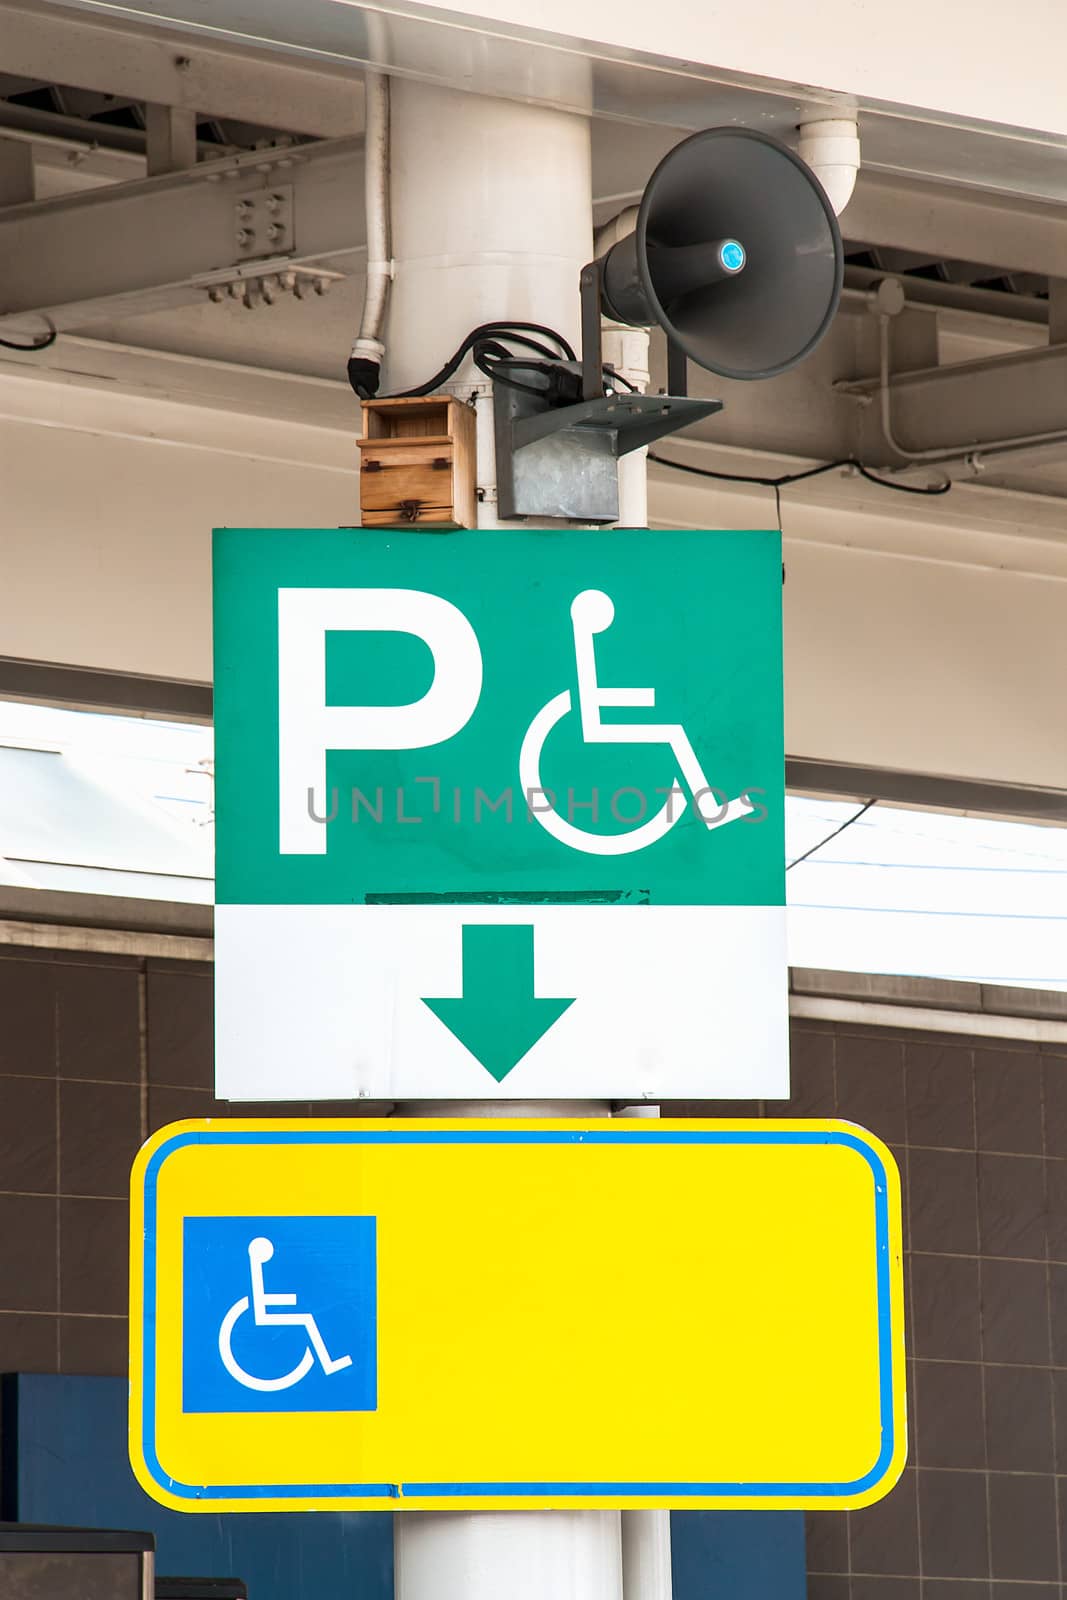 Plates for the disabled to be installed close to the speakers.